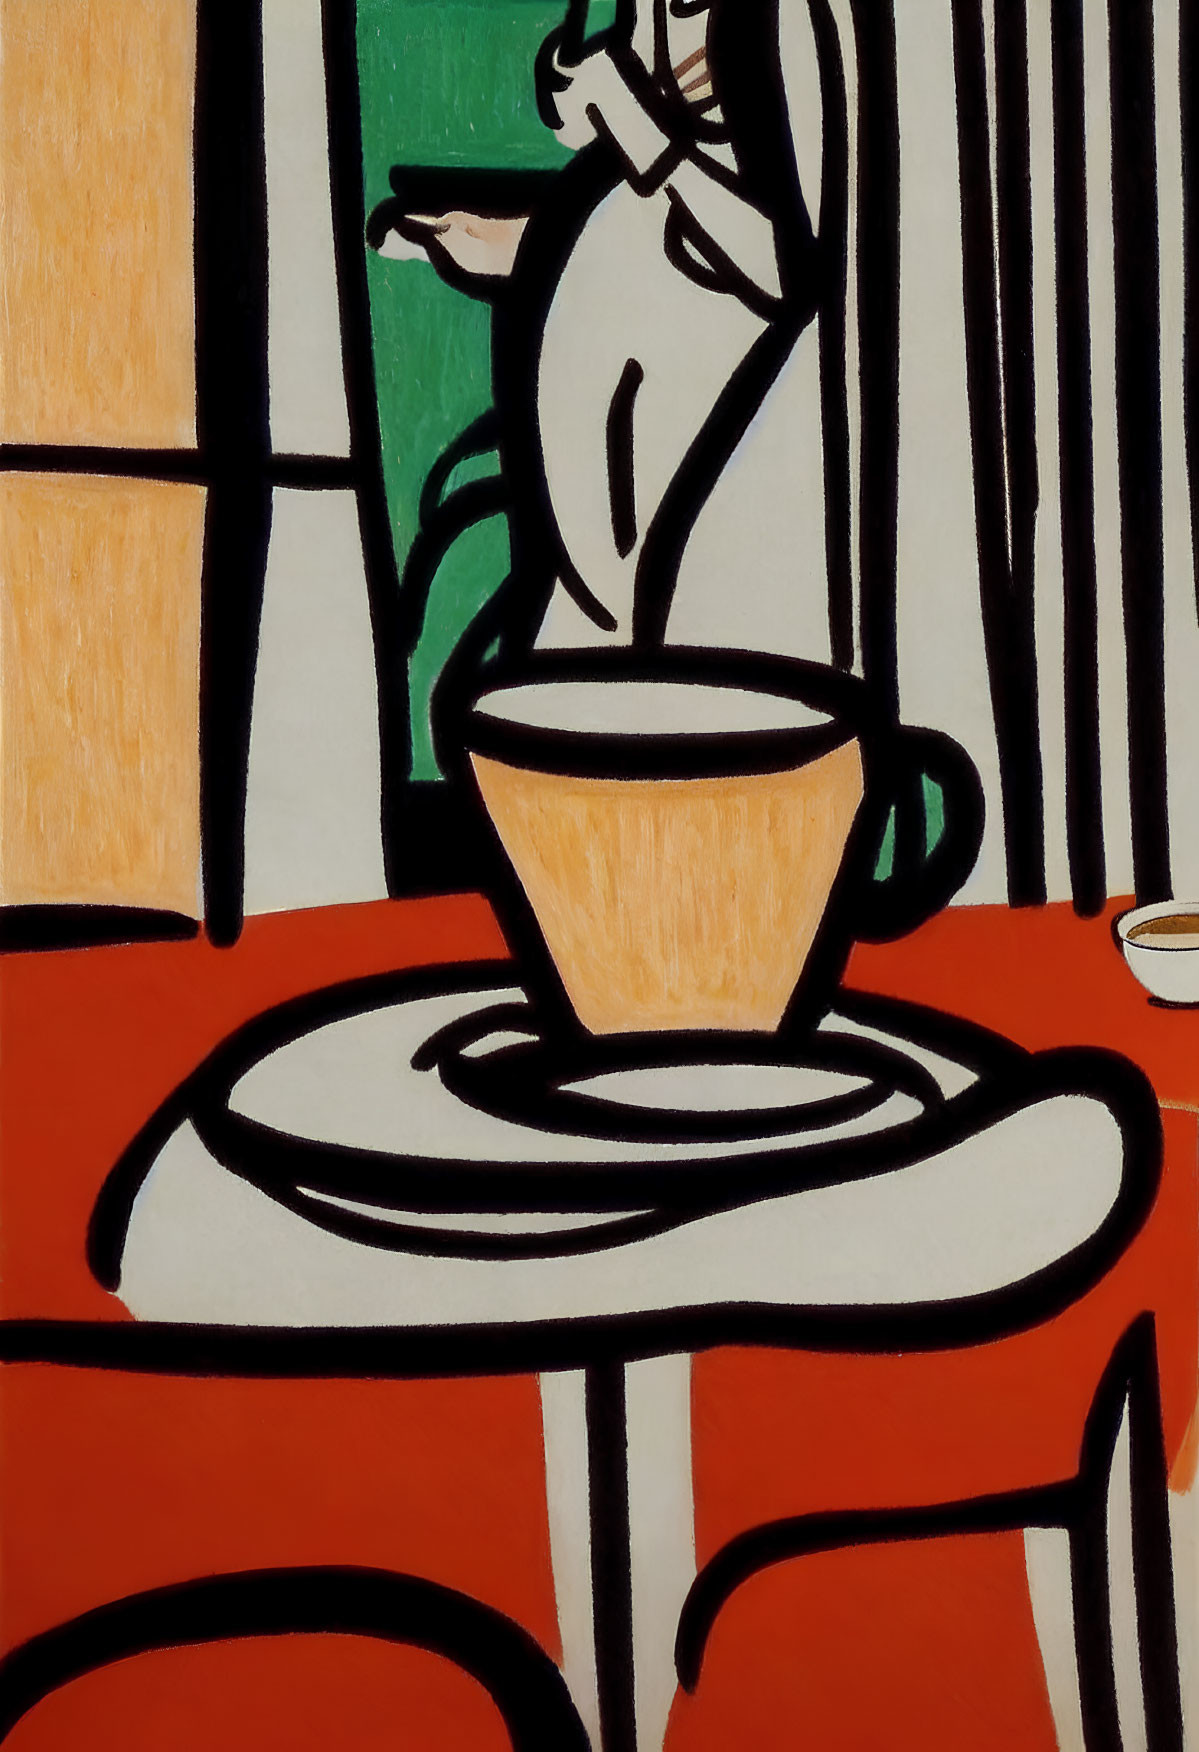 Colorful Abstract Coffee Cup Art on Table with Abstract Figure